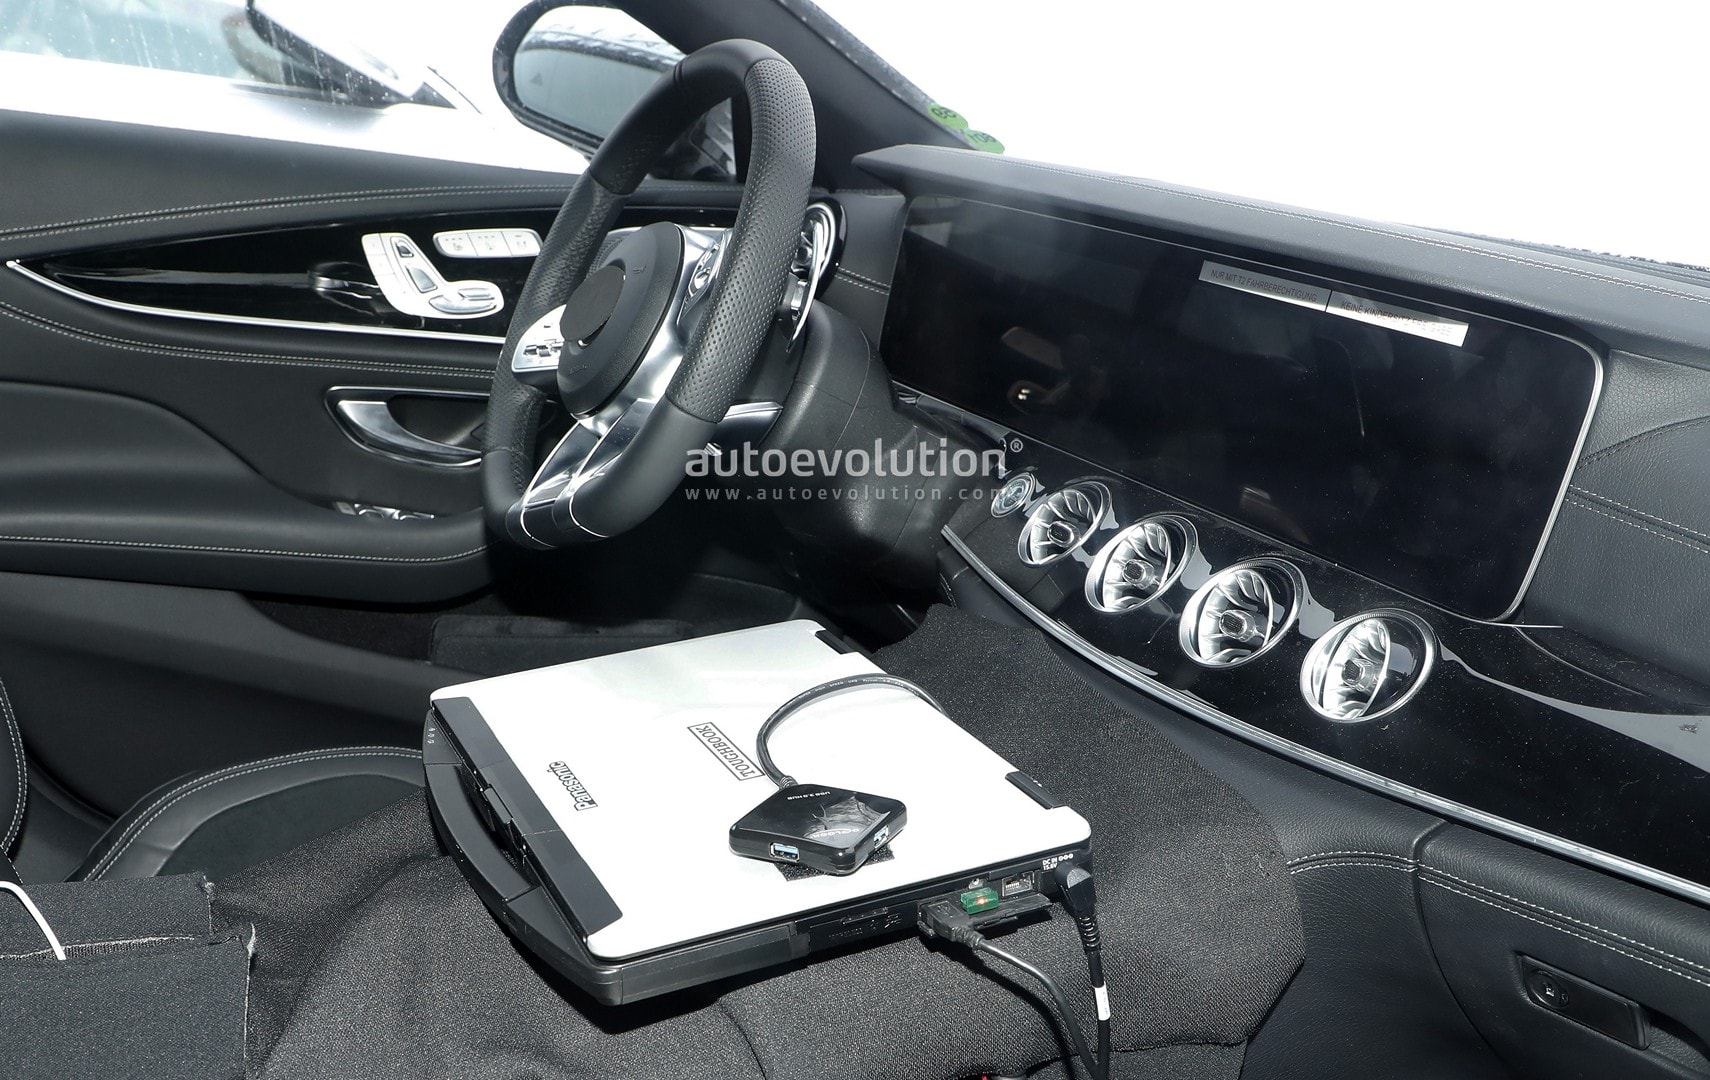 Four Door Mercedes Amg Gt Coupe Reveals Interior In Latest